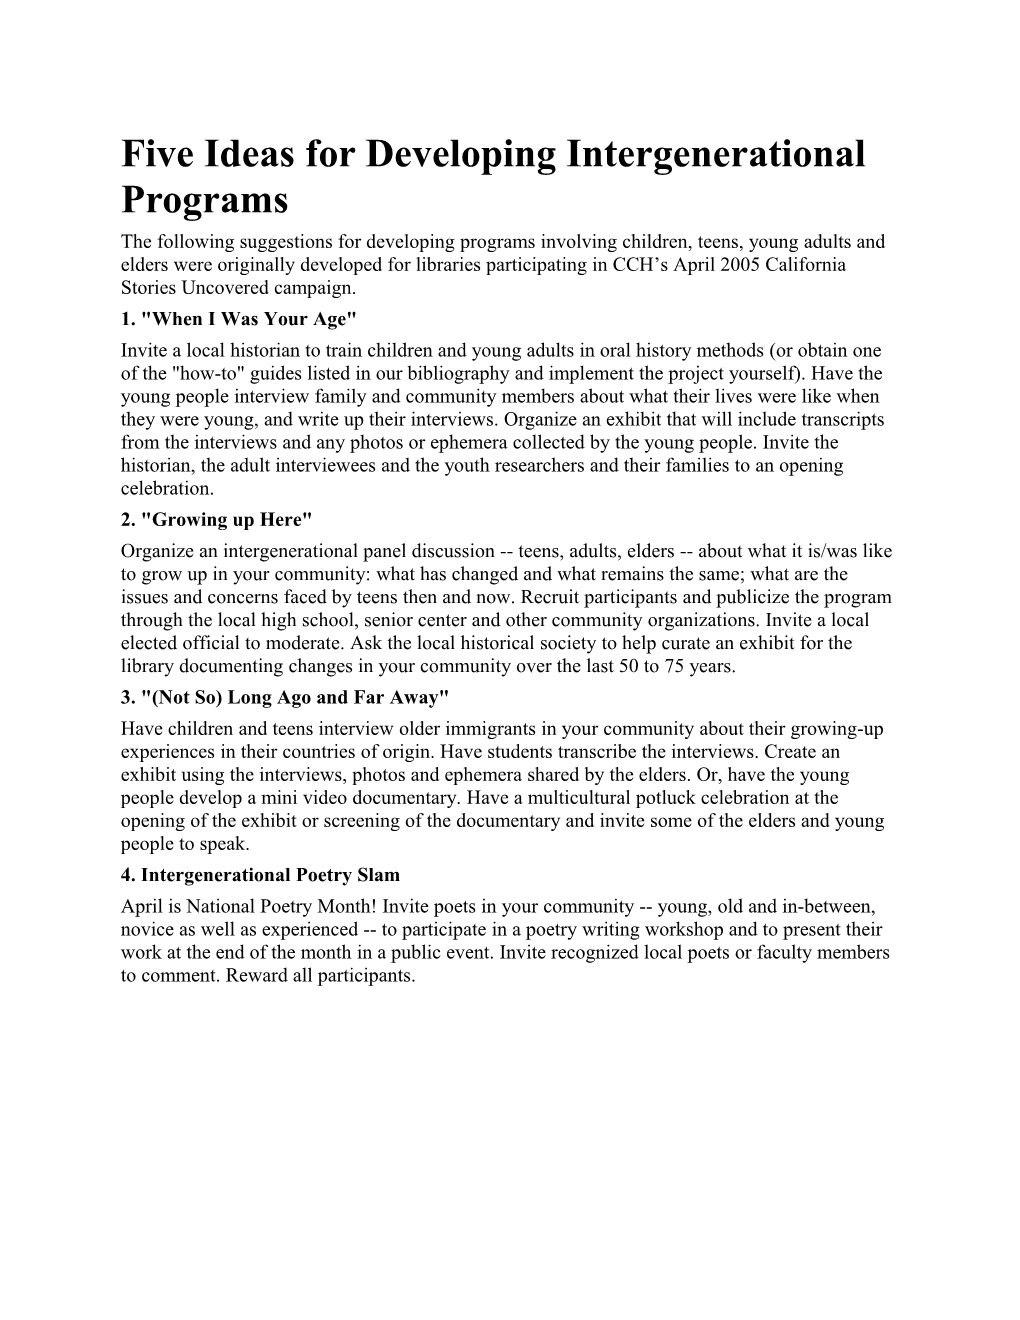 Five Ideas for Developing Intergenerational Programs